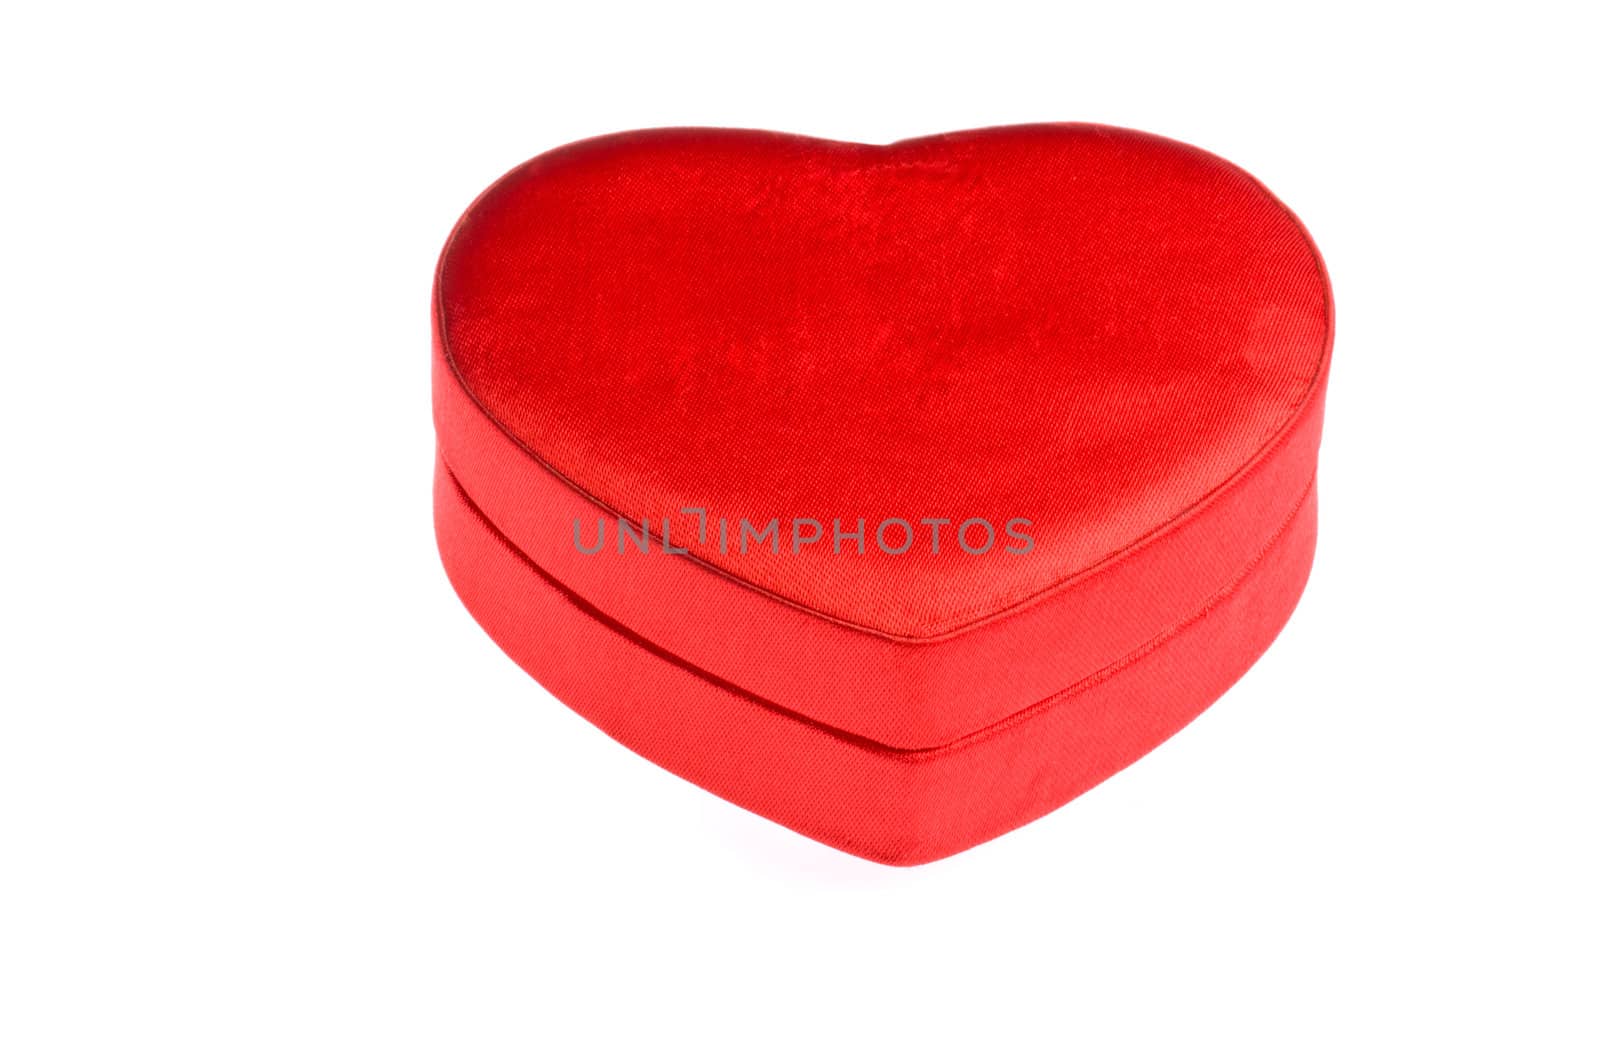 Closed red heart shape box over white